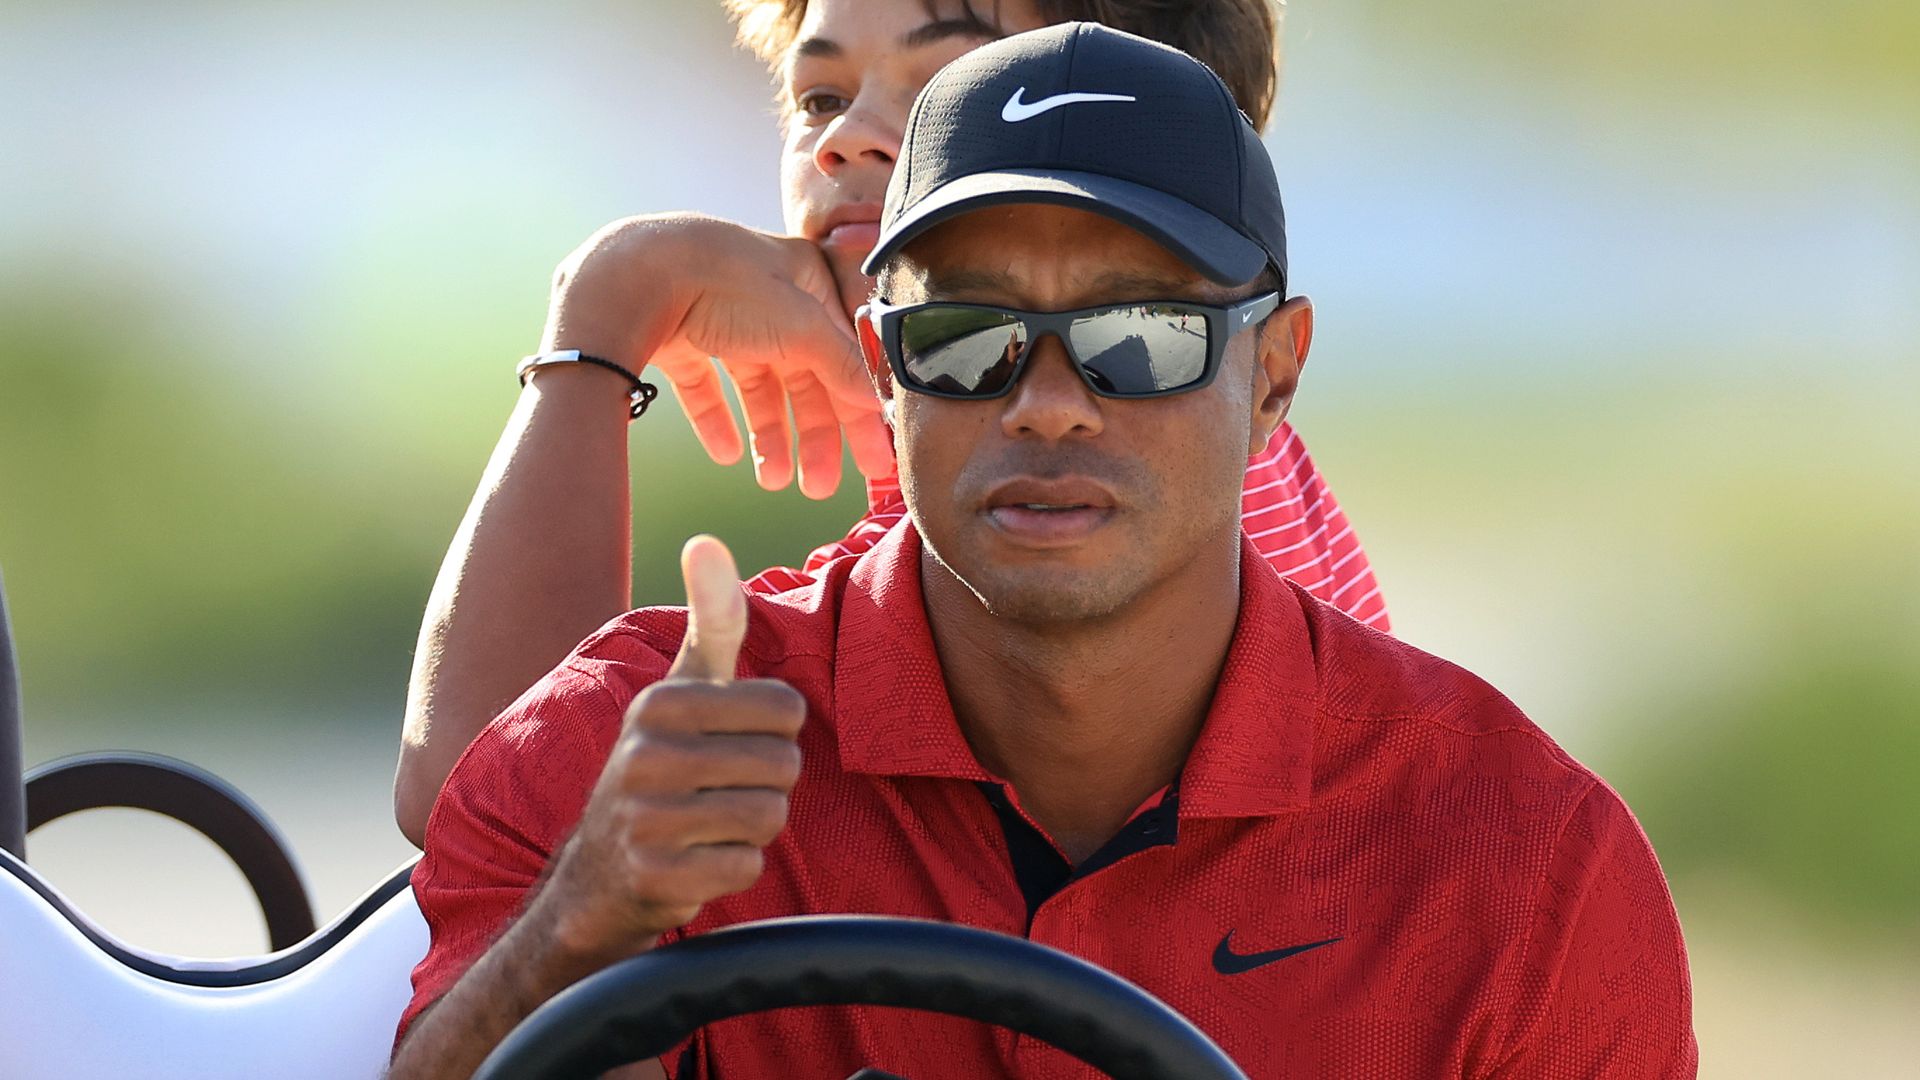 Tiger's return: What can we expect? | 'We'll be carrying him down the hill!'